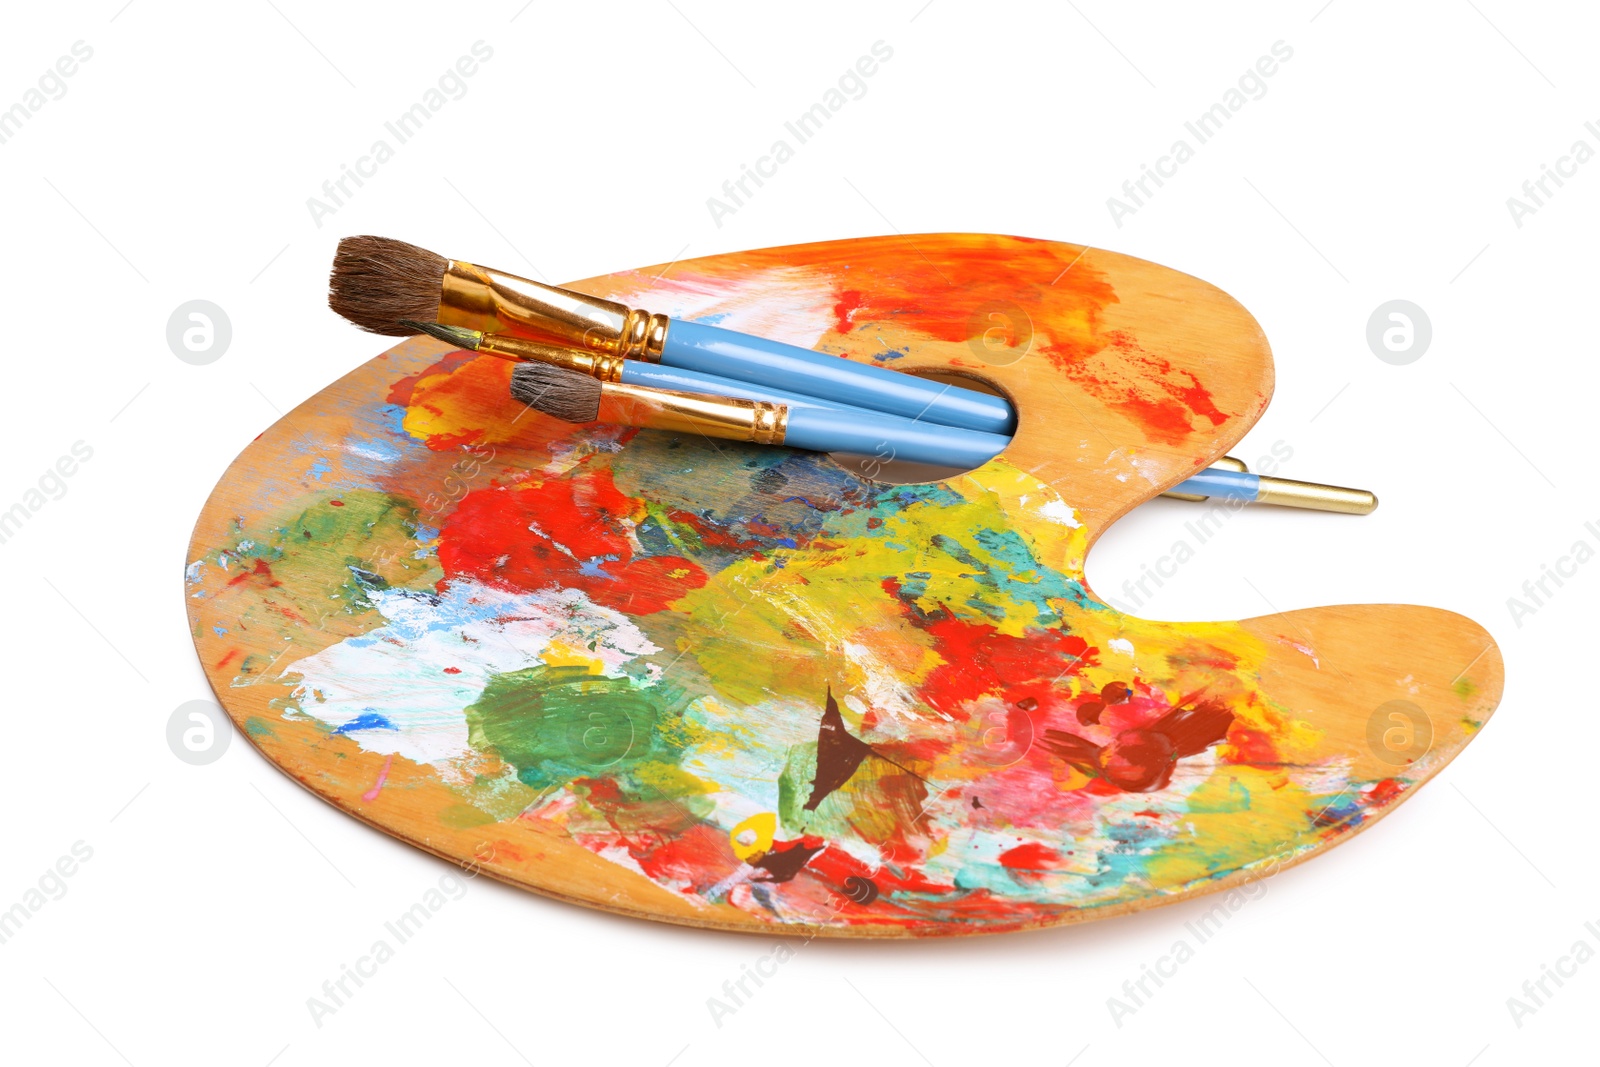 Photo of Palette with paints and brushes on white background. Artist equipment